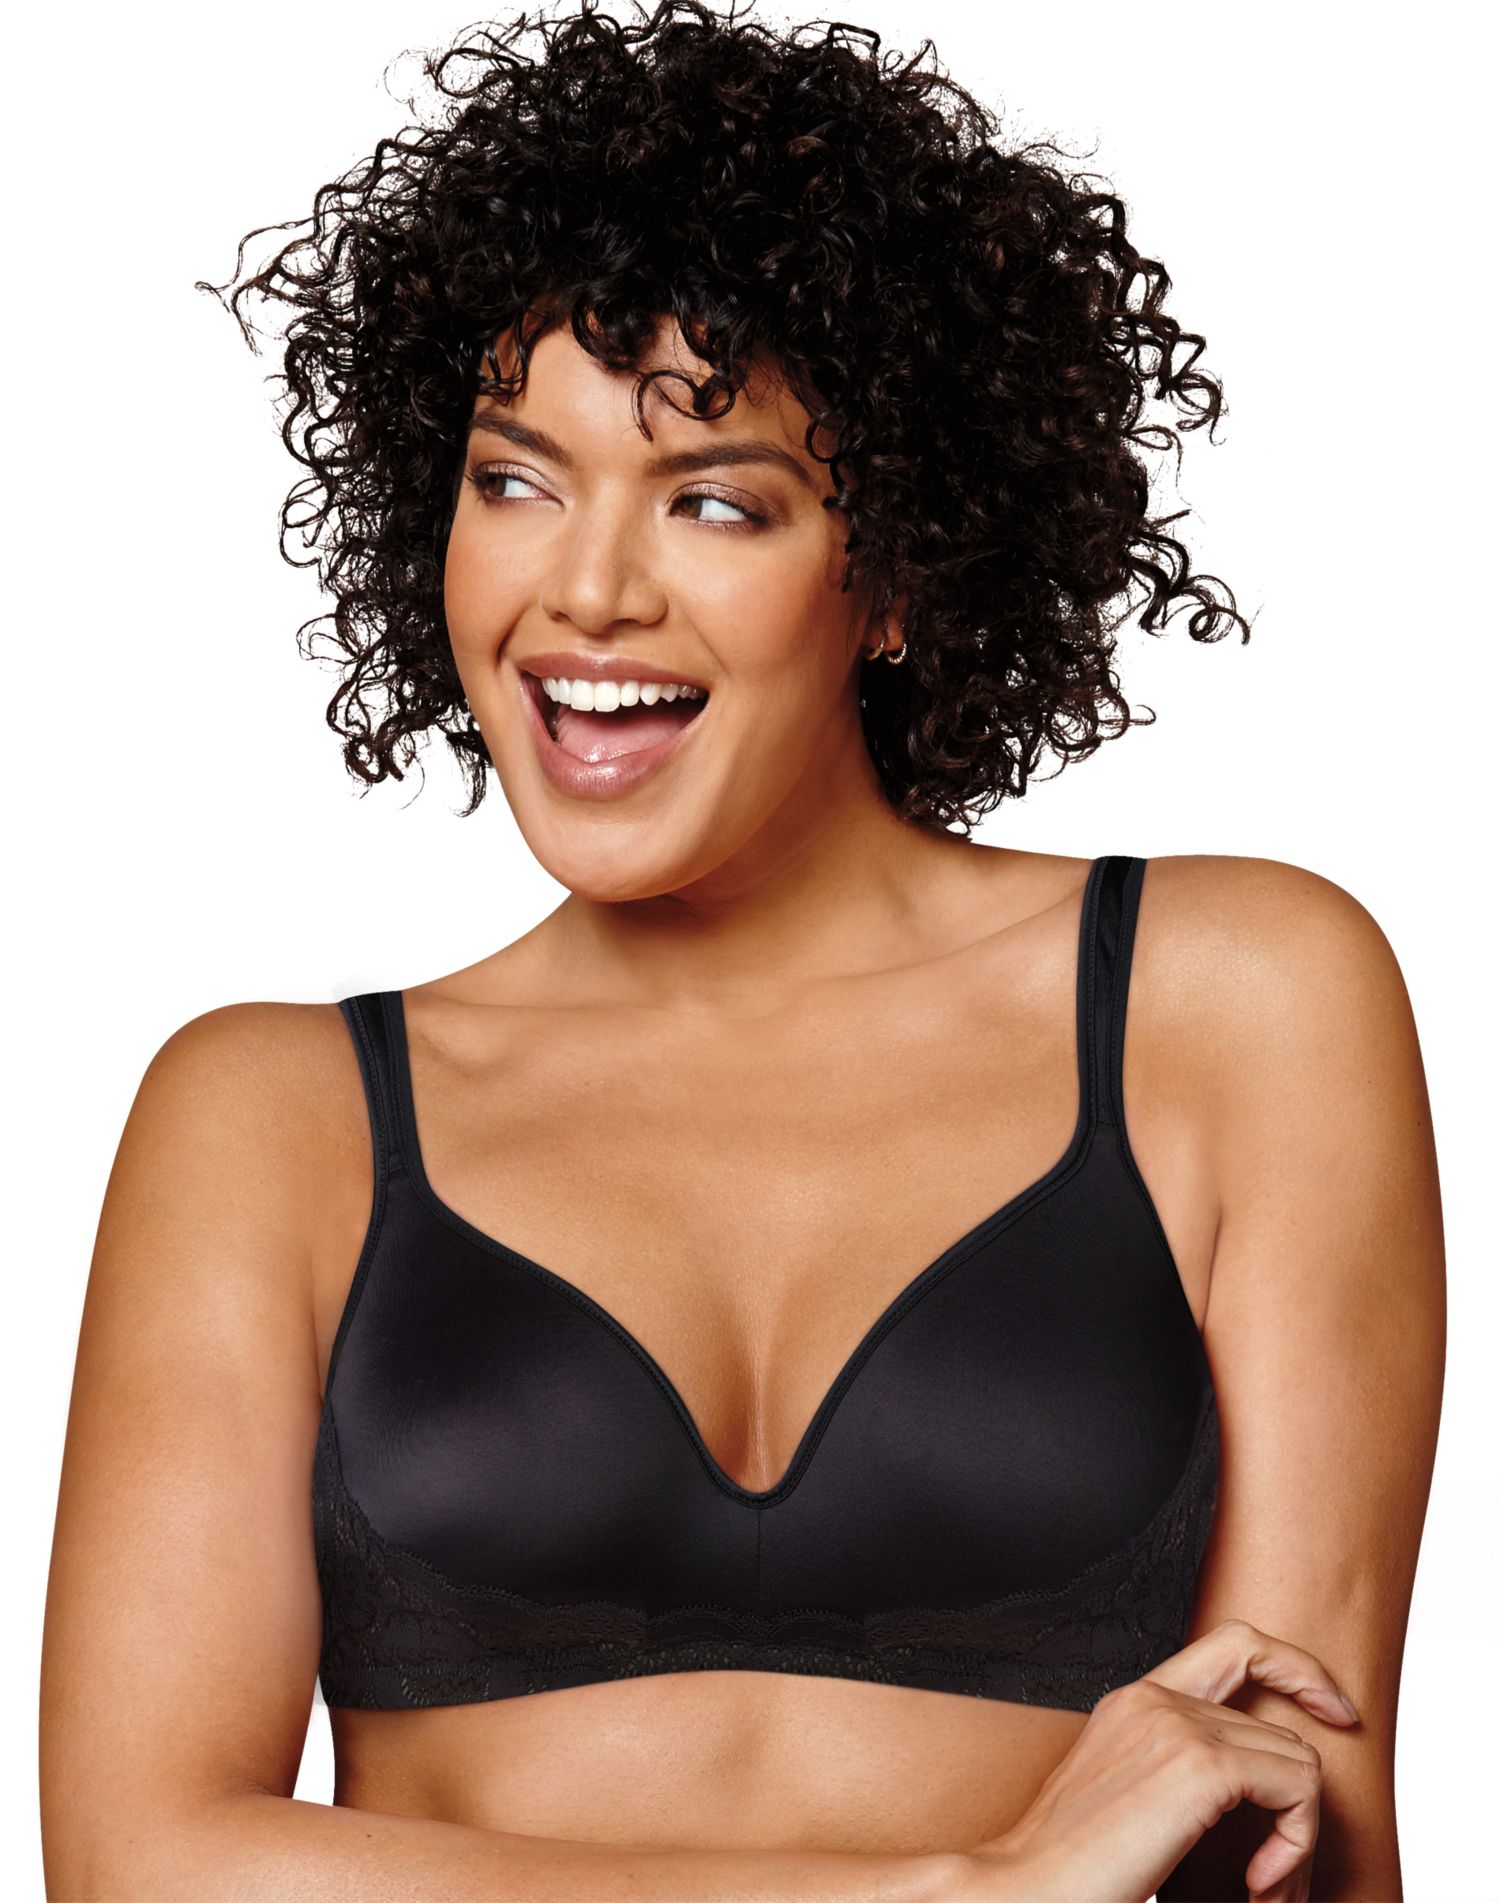 Playtex Women's Secrets All Over Smoothing Full-Figure Underwire